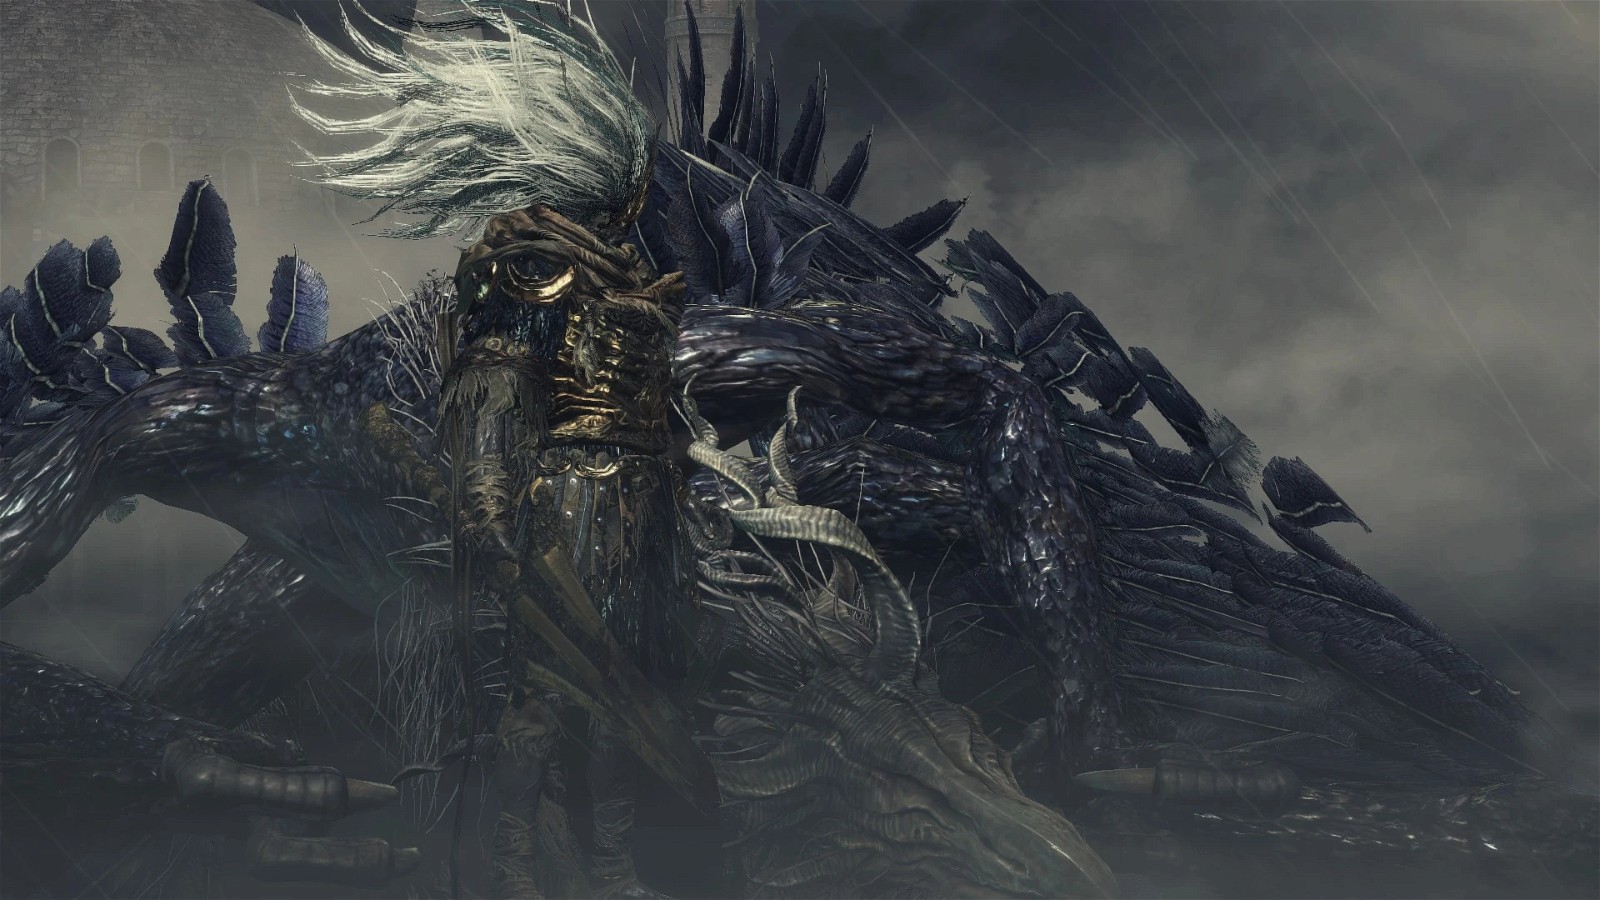 The Nameless King is all but confirmed to be the true firstborn of Gwyn. Image credit: FromSoftware